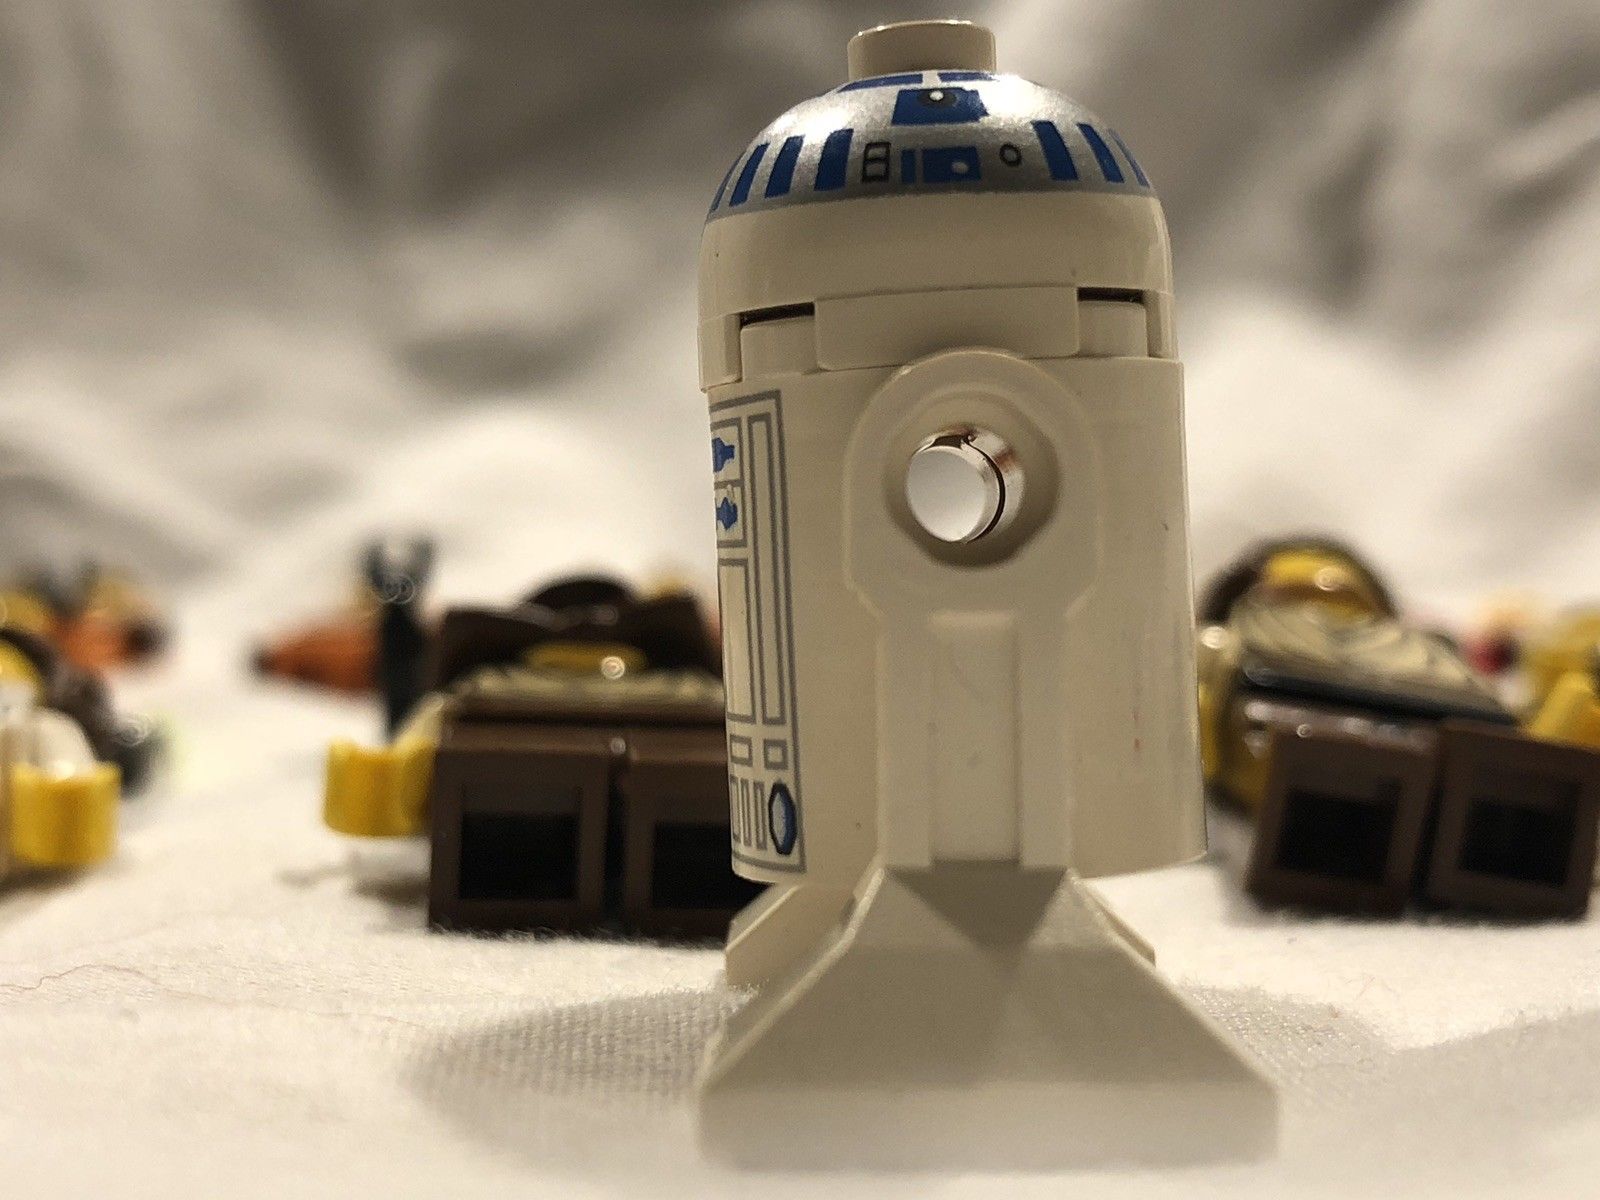 LEGO STAR WARS R2D2 PROTOTYPE PRE PRODUCTION MINIFIGURE 1998 EXTREMELY ...